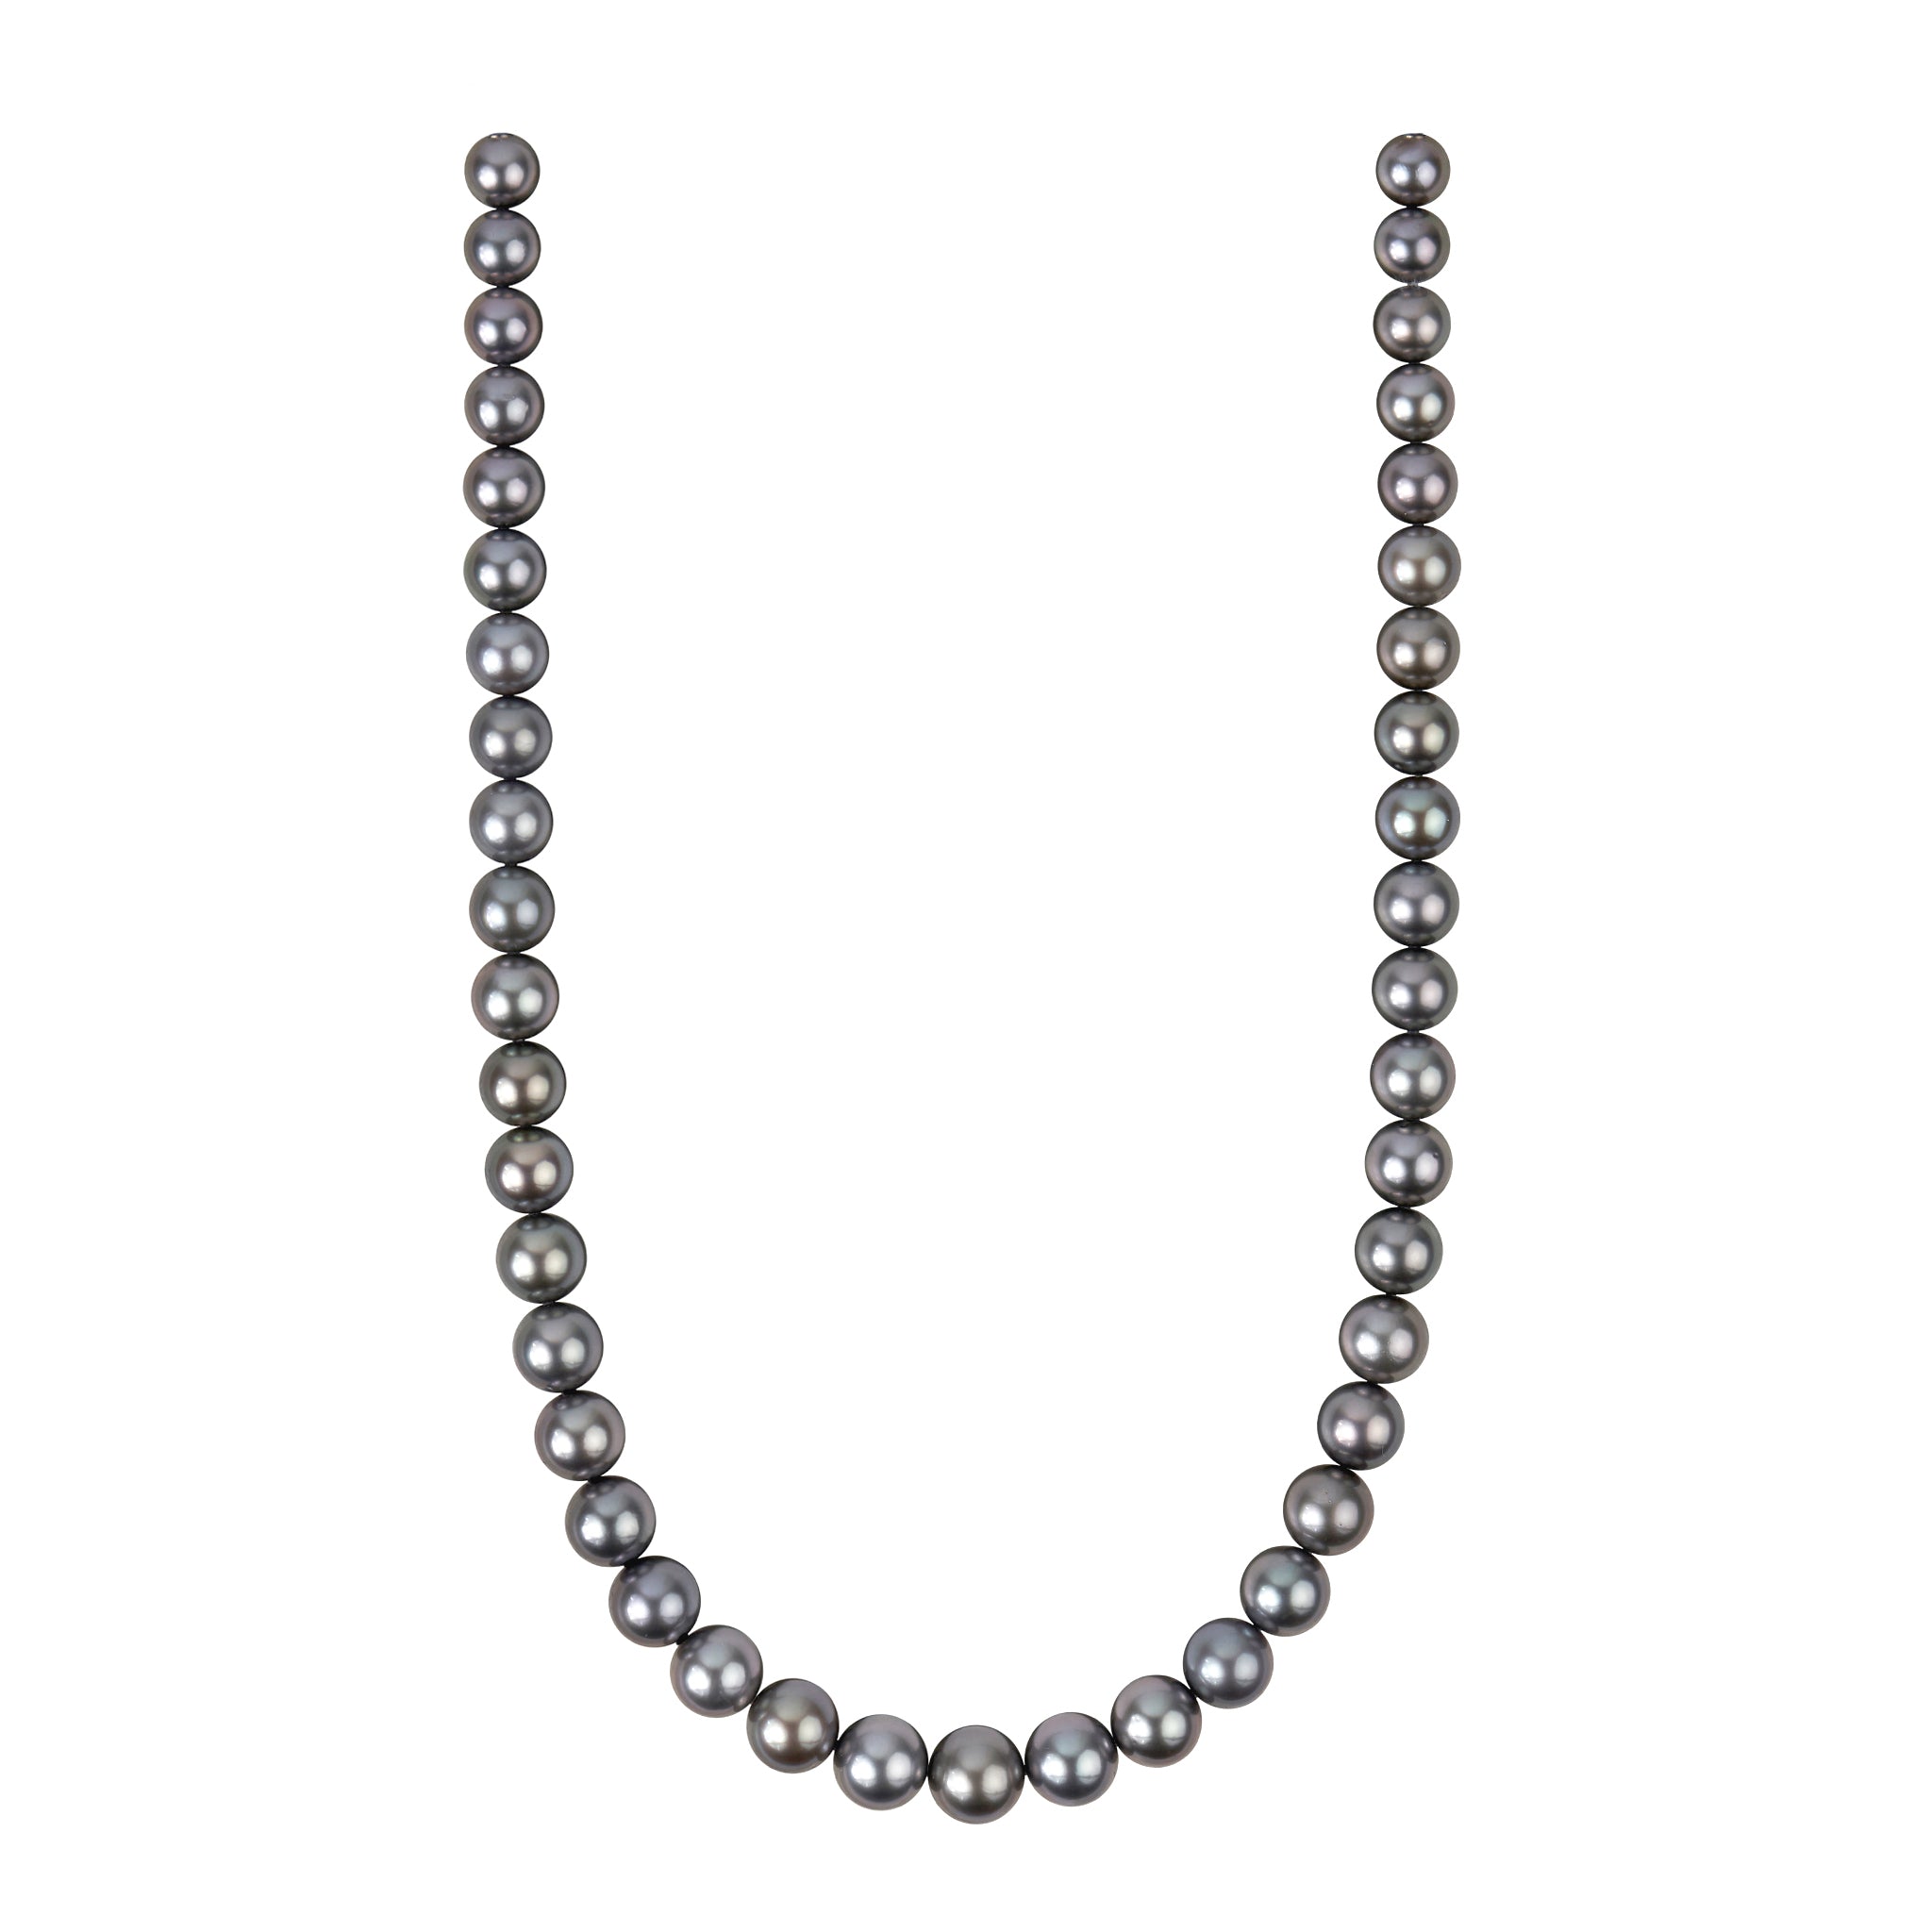 8.0-10.6 mm AAA Tahitian Round Pearl Necklace Strand